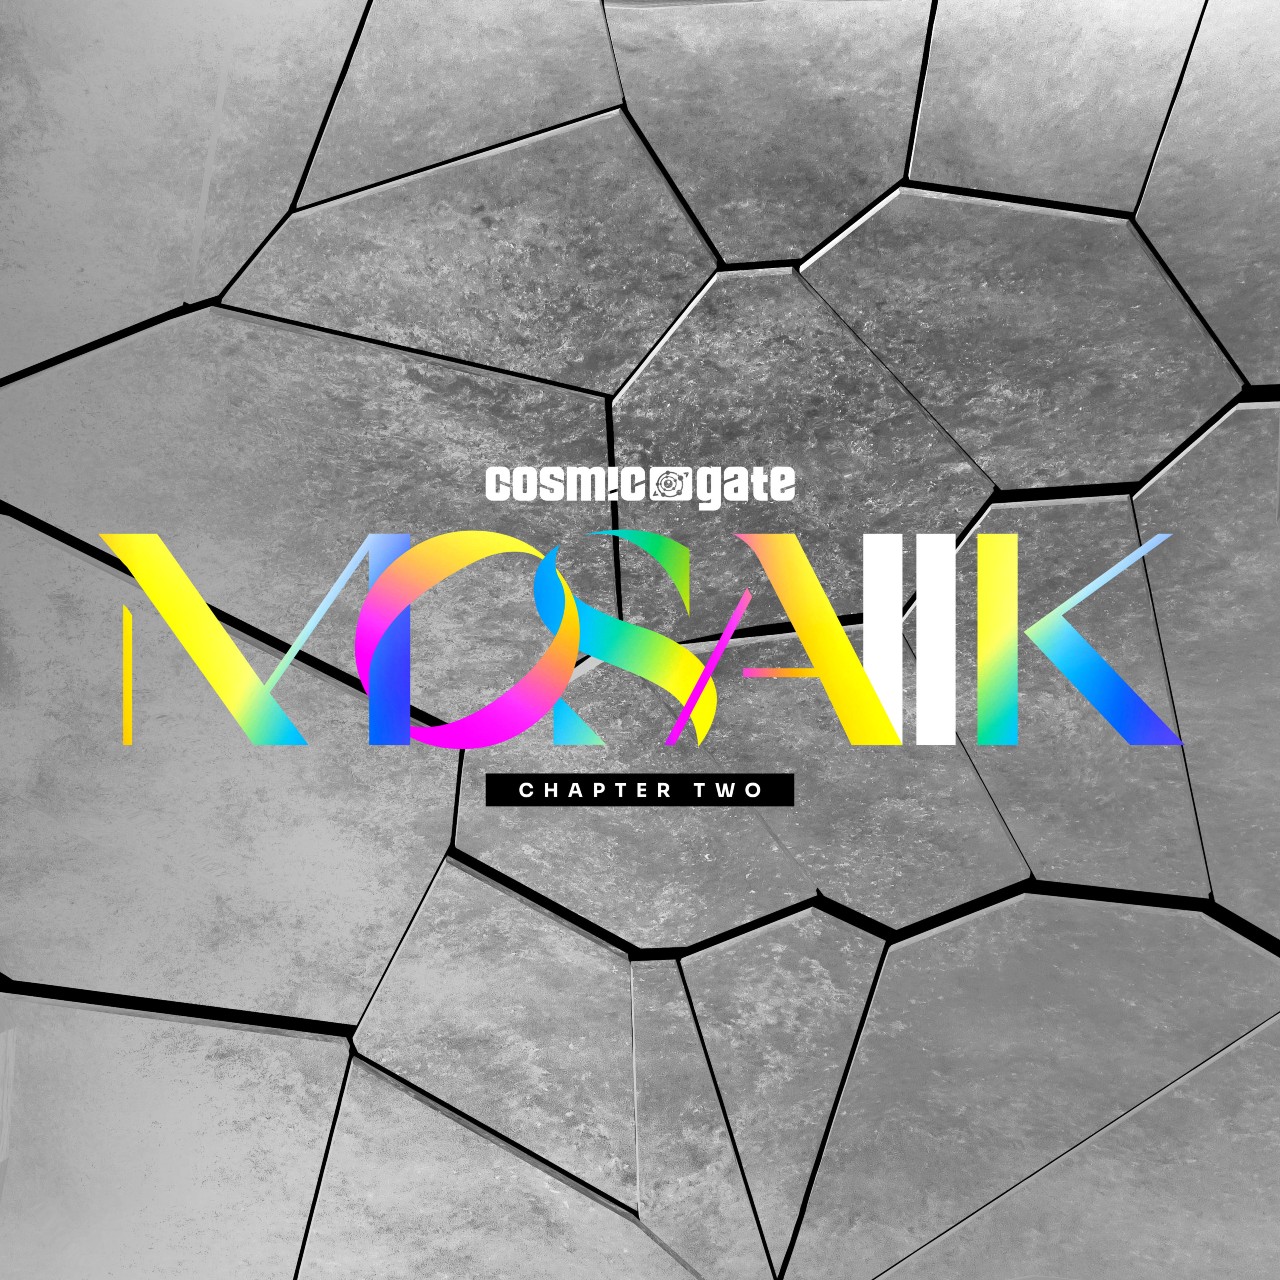 Cosmic Gate presents MOSAIIK Chapter Two on Black Hole Recordings